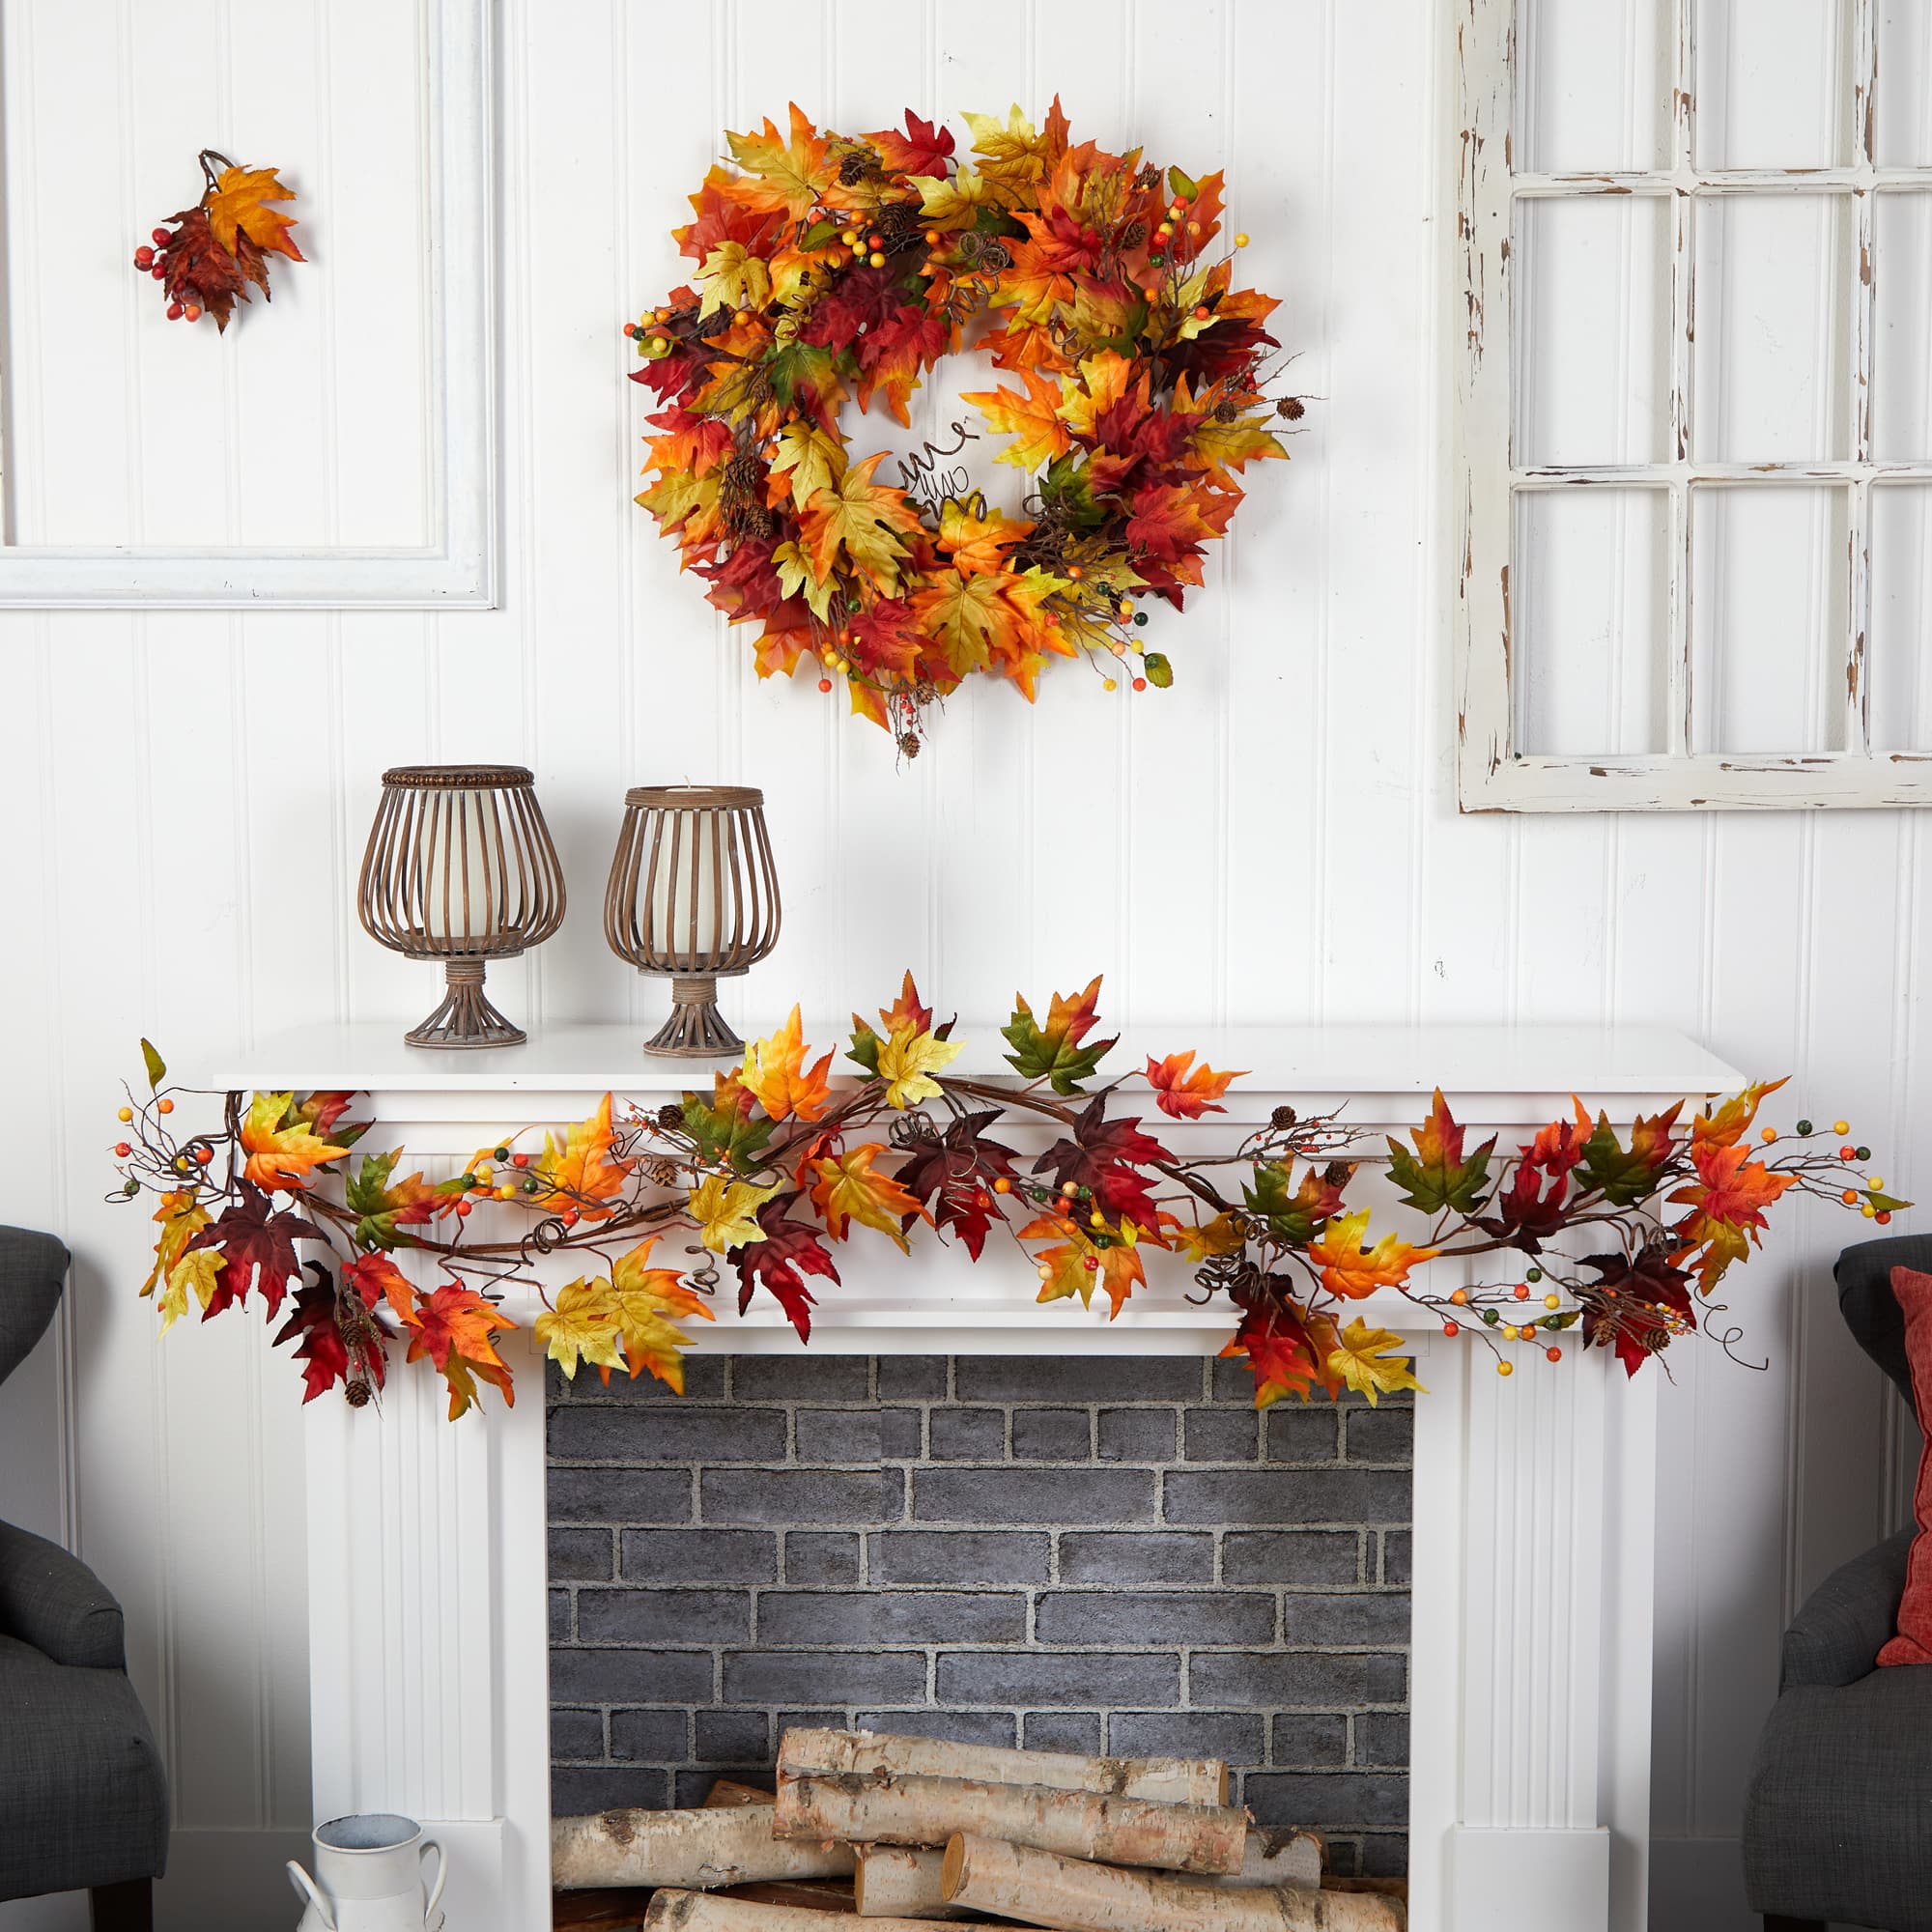 6ft. Autumn Maple Leaf &#x26; Berry Fall Garland